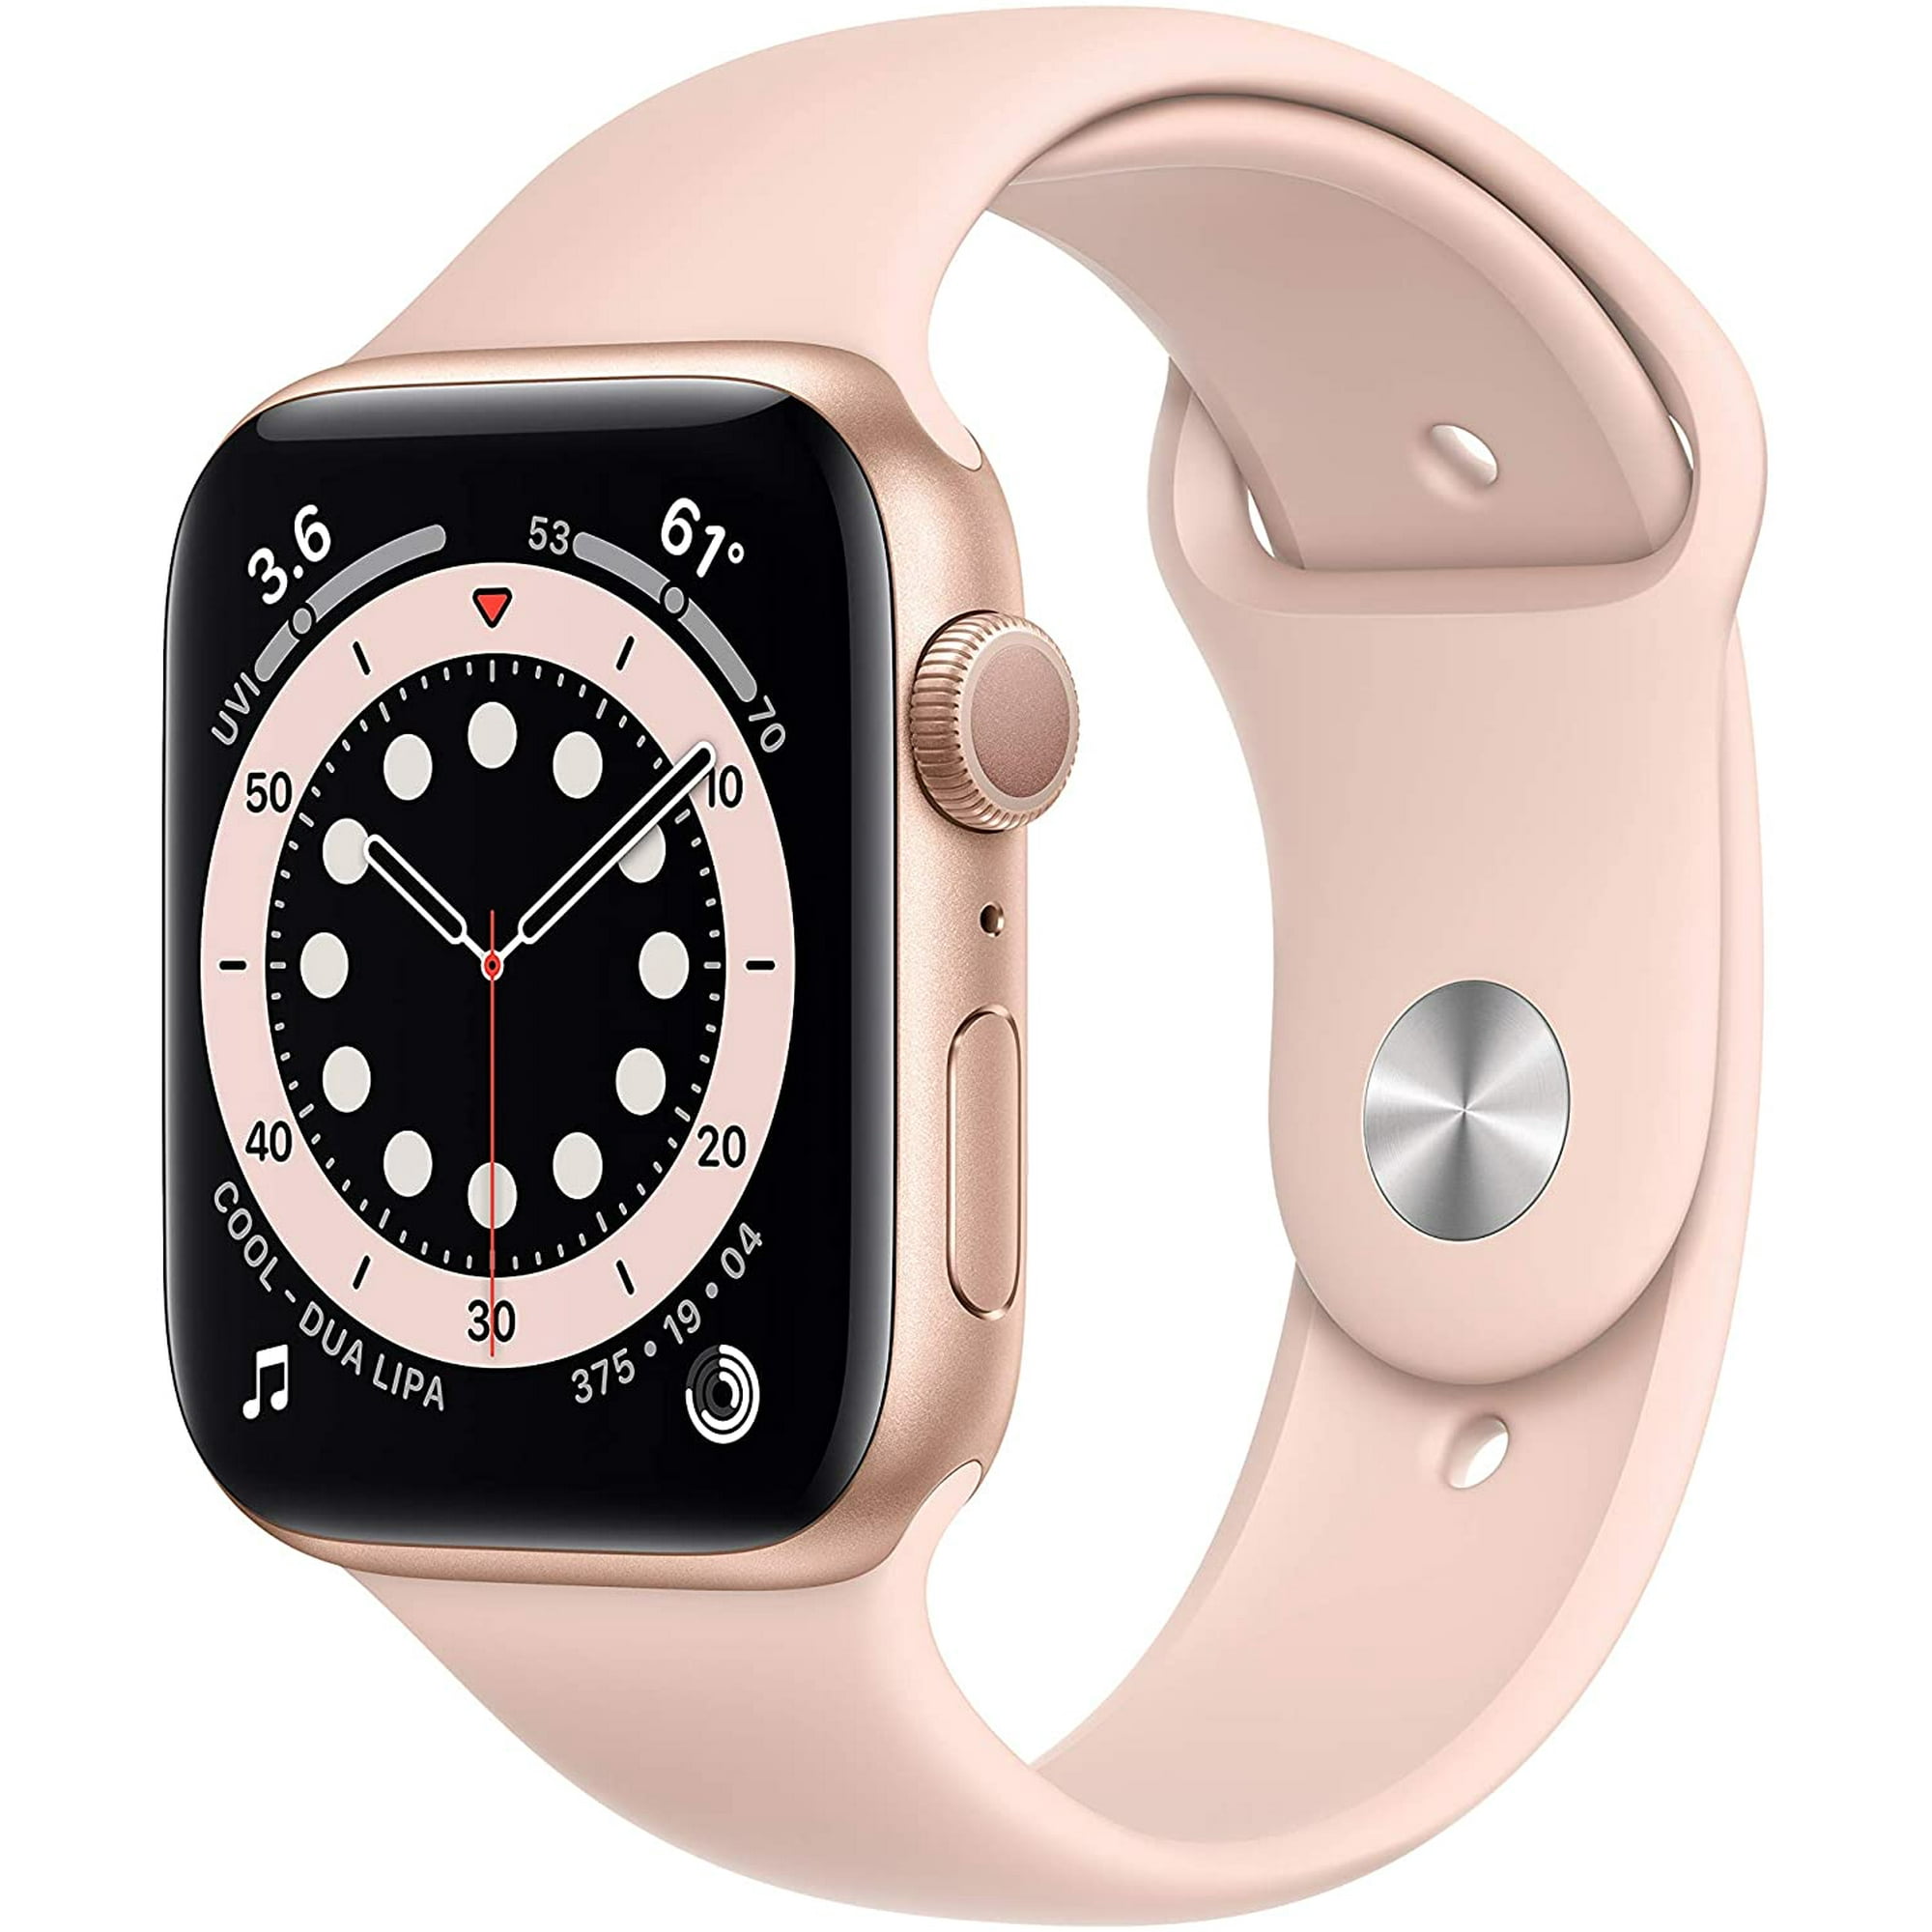 Apple Watch Series 6 (GPS, 44mm) Gold Case + Pink Sand Sport Band